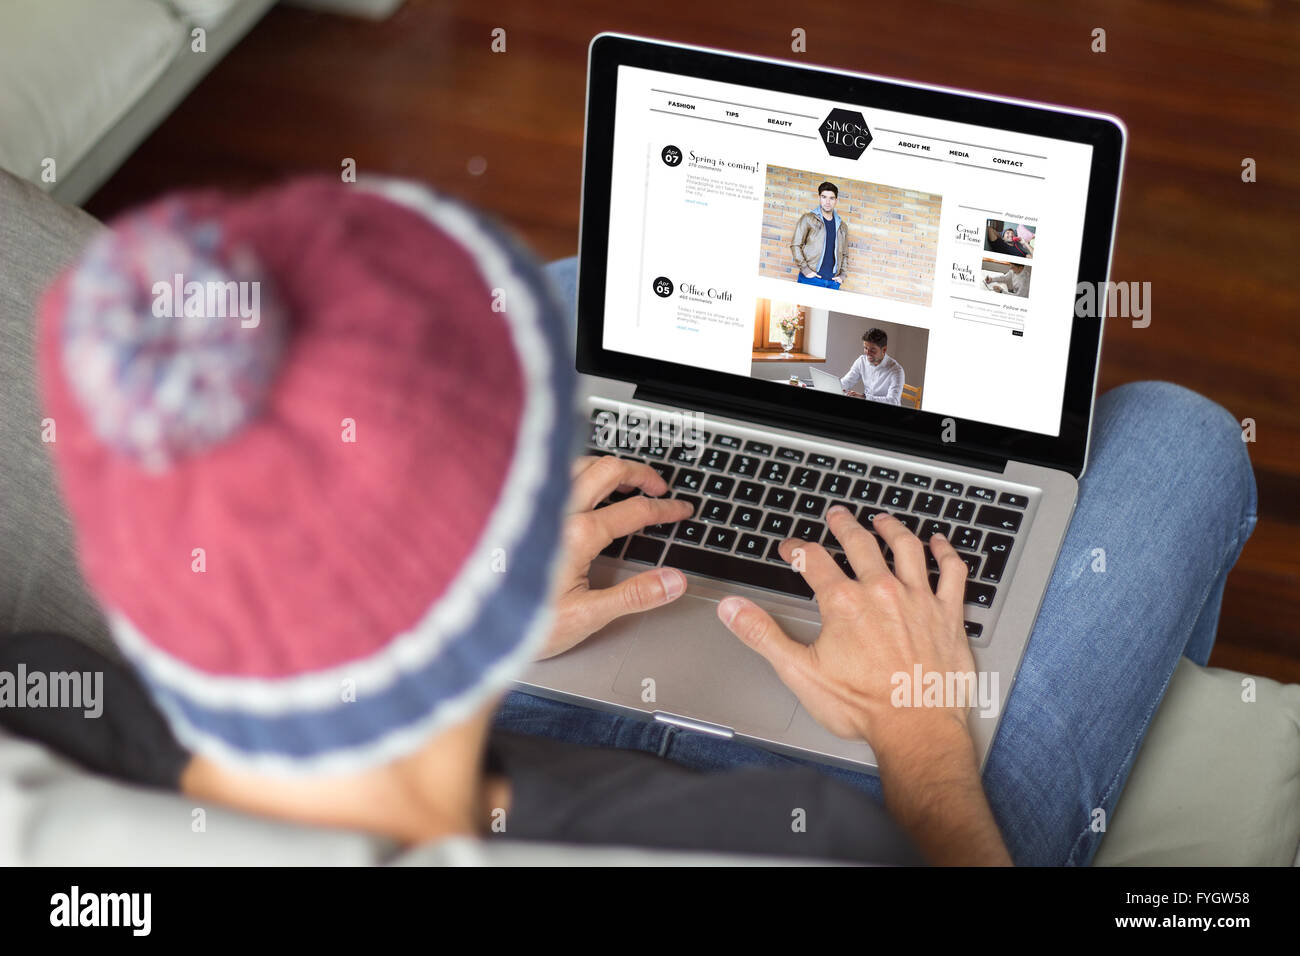 influencer surfing on a fashion male blog. All screen graphics are made up. Stock Photo